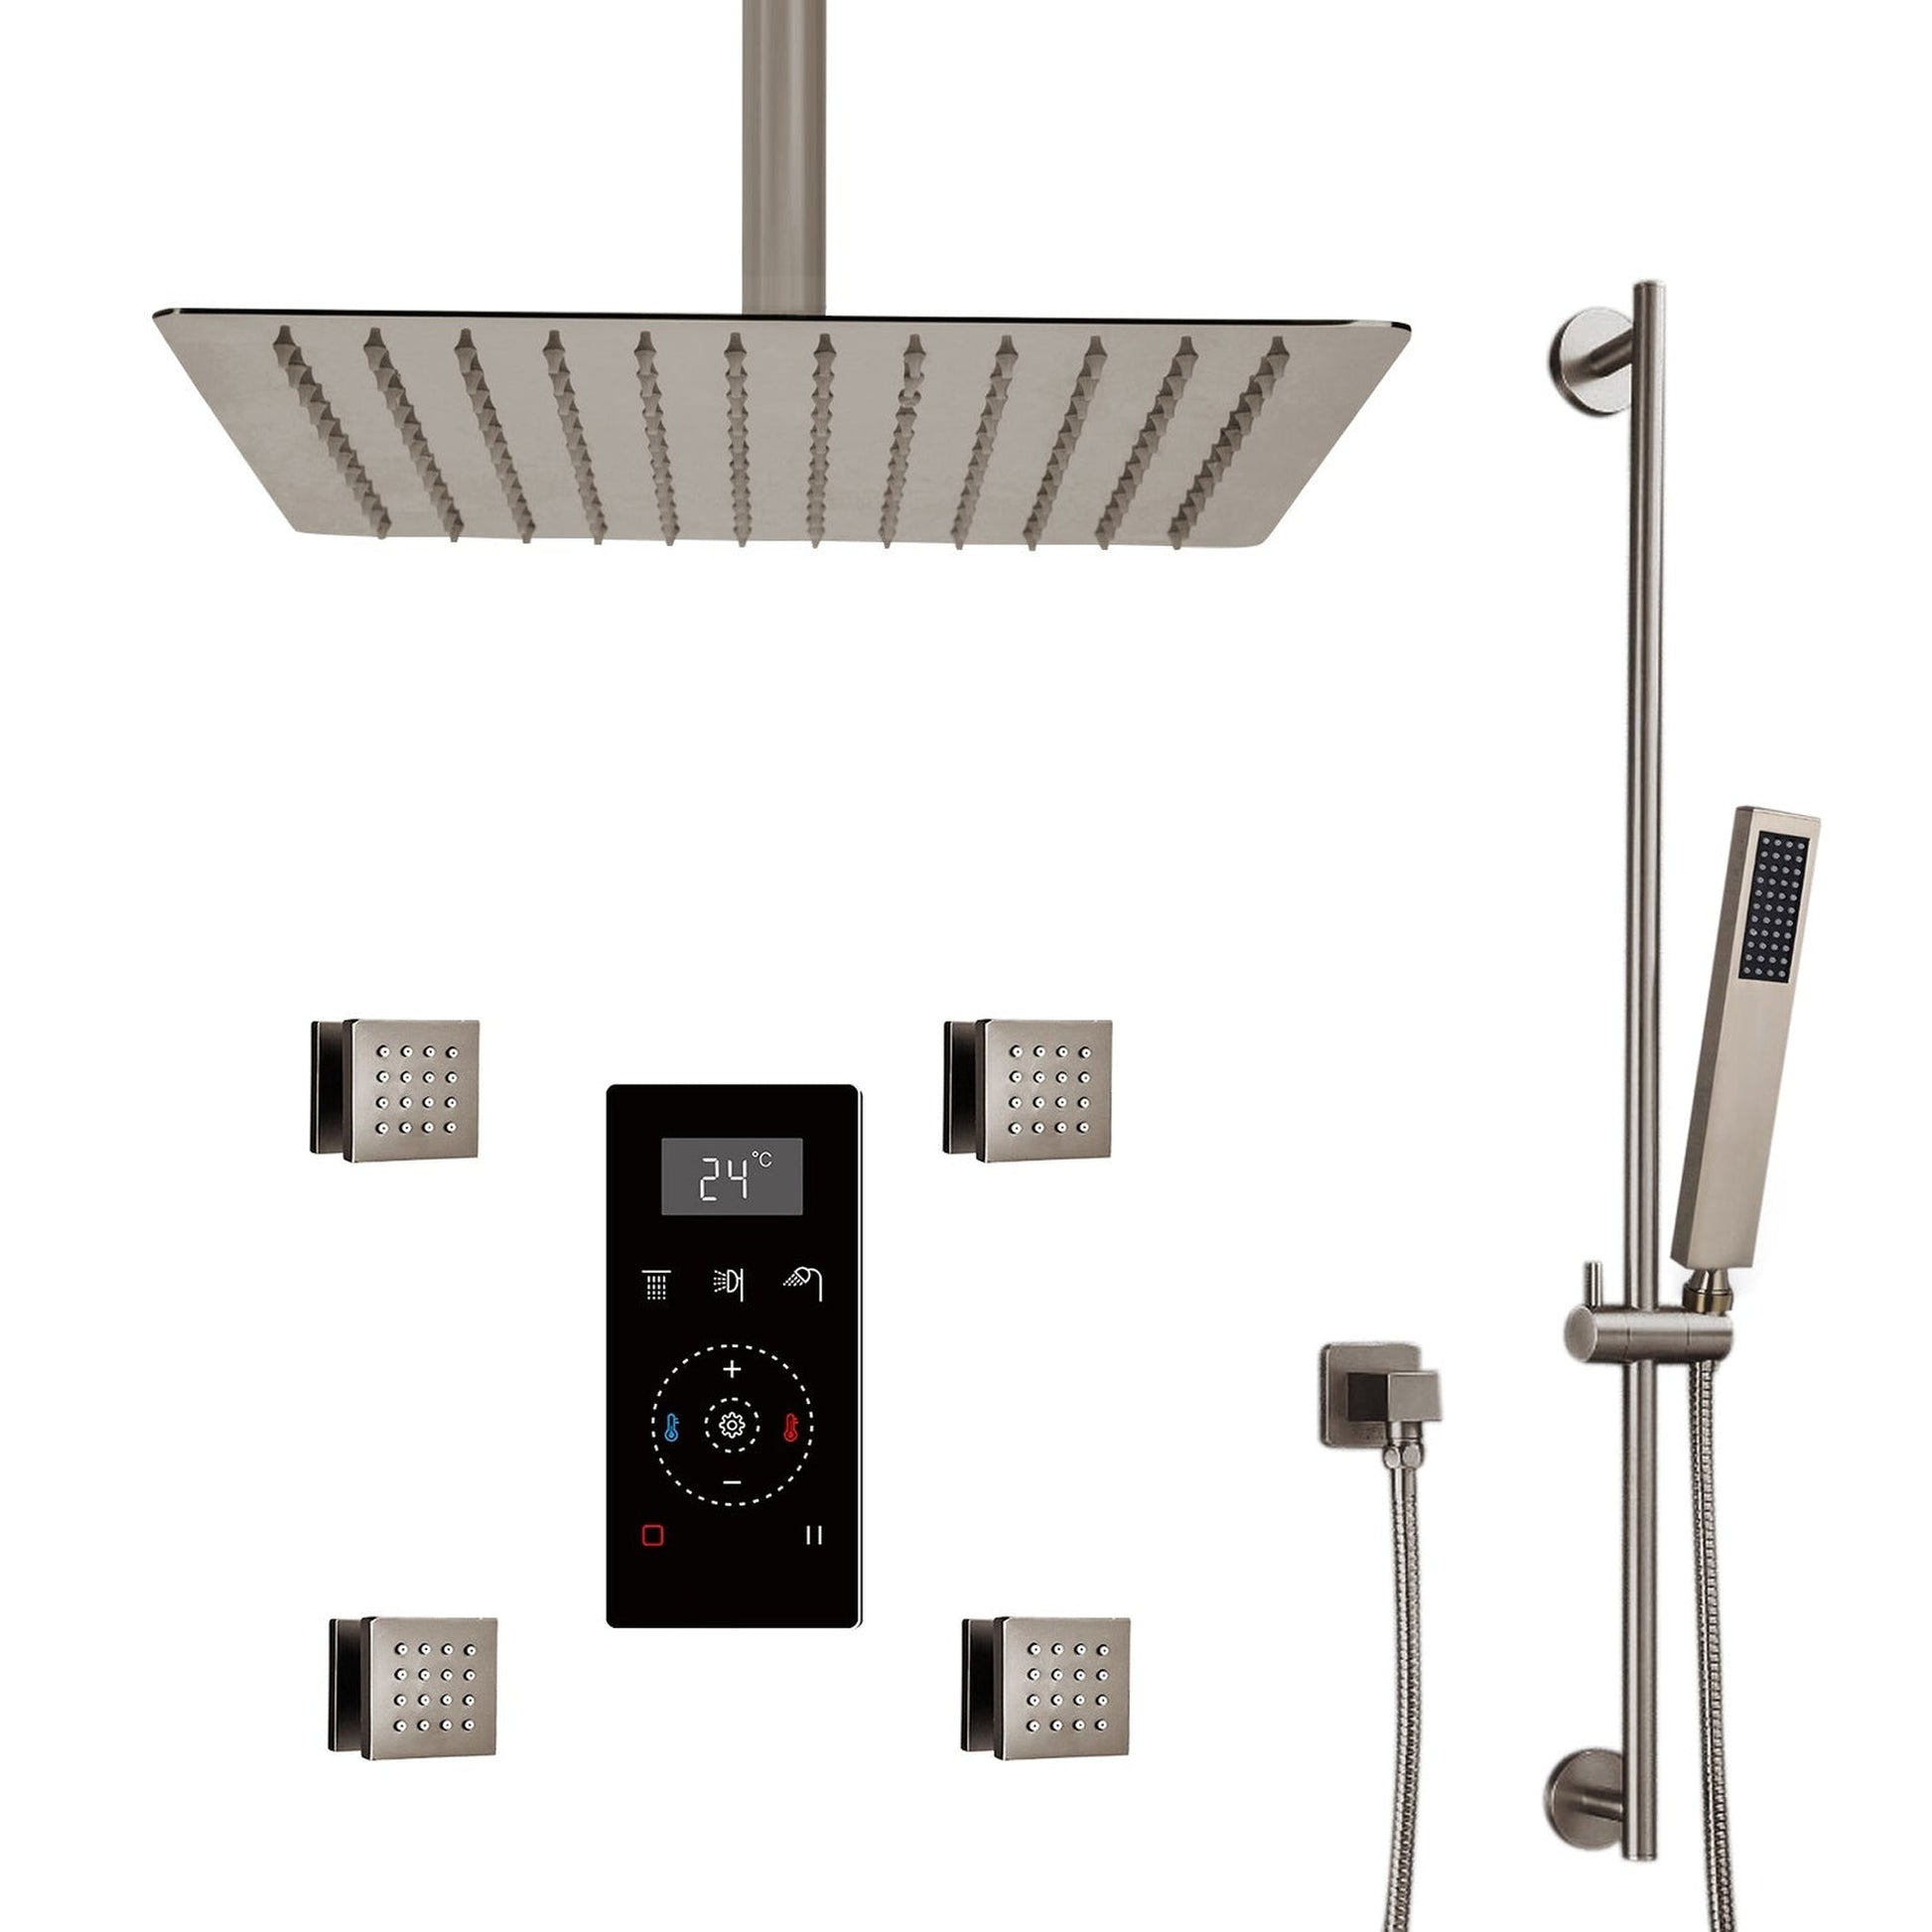 Fontana 8" Brushed Nickel Ceiling Mounted Rainfall Digital Thermostat Mixer Shower System With 4-Jet Body Spray, Hand Shower and Without Water Powered LED Lights